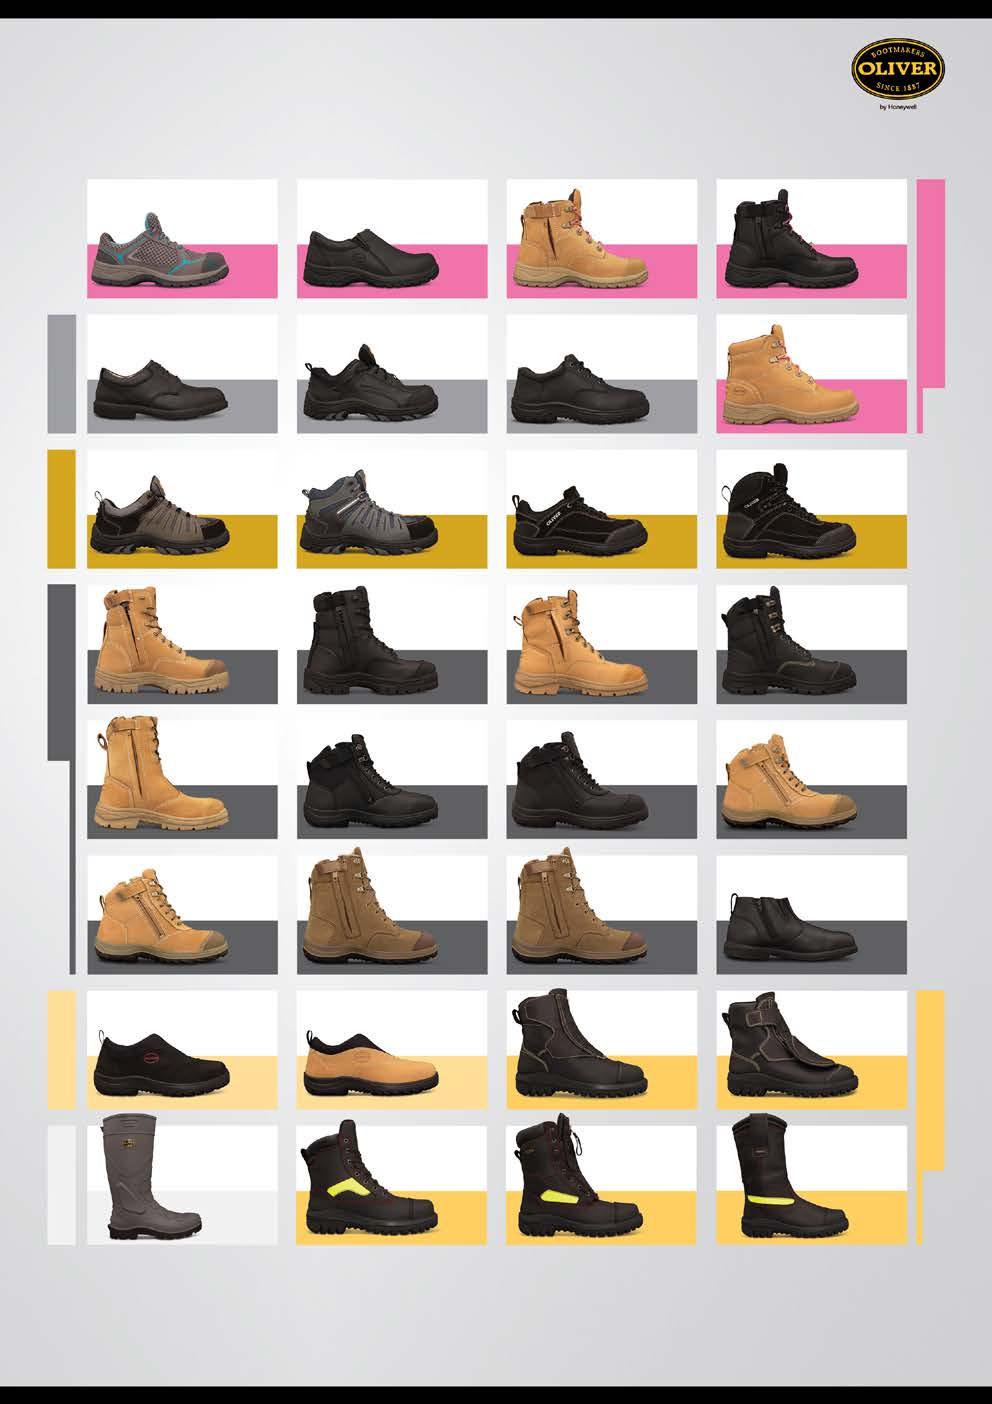 FOOTWEAR SELECTOR SLIP ON SHOES ZIP SIDED BOOTS L/UP JOGGERS LACE UP SHOES GUMBOOTS PB 49-414 GREY/BLUE LACE UP SPORTS SHOE (LADIES) AT 45-632Z 150MM WHEAT ZIP SIDED BOOT (NON METALLIC) AT 55-385